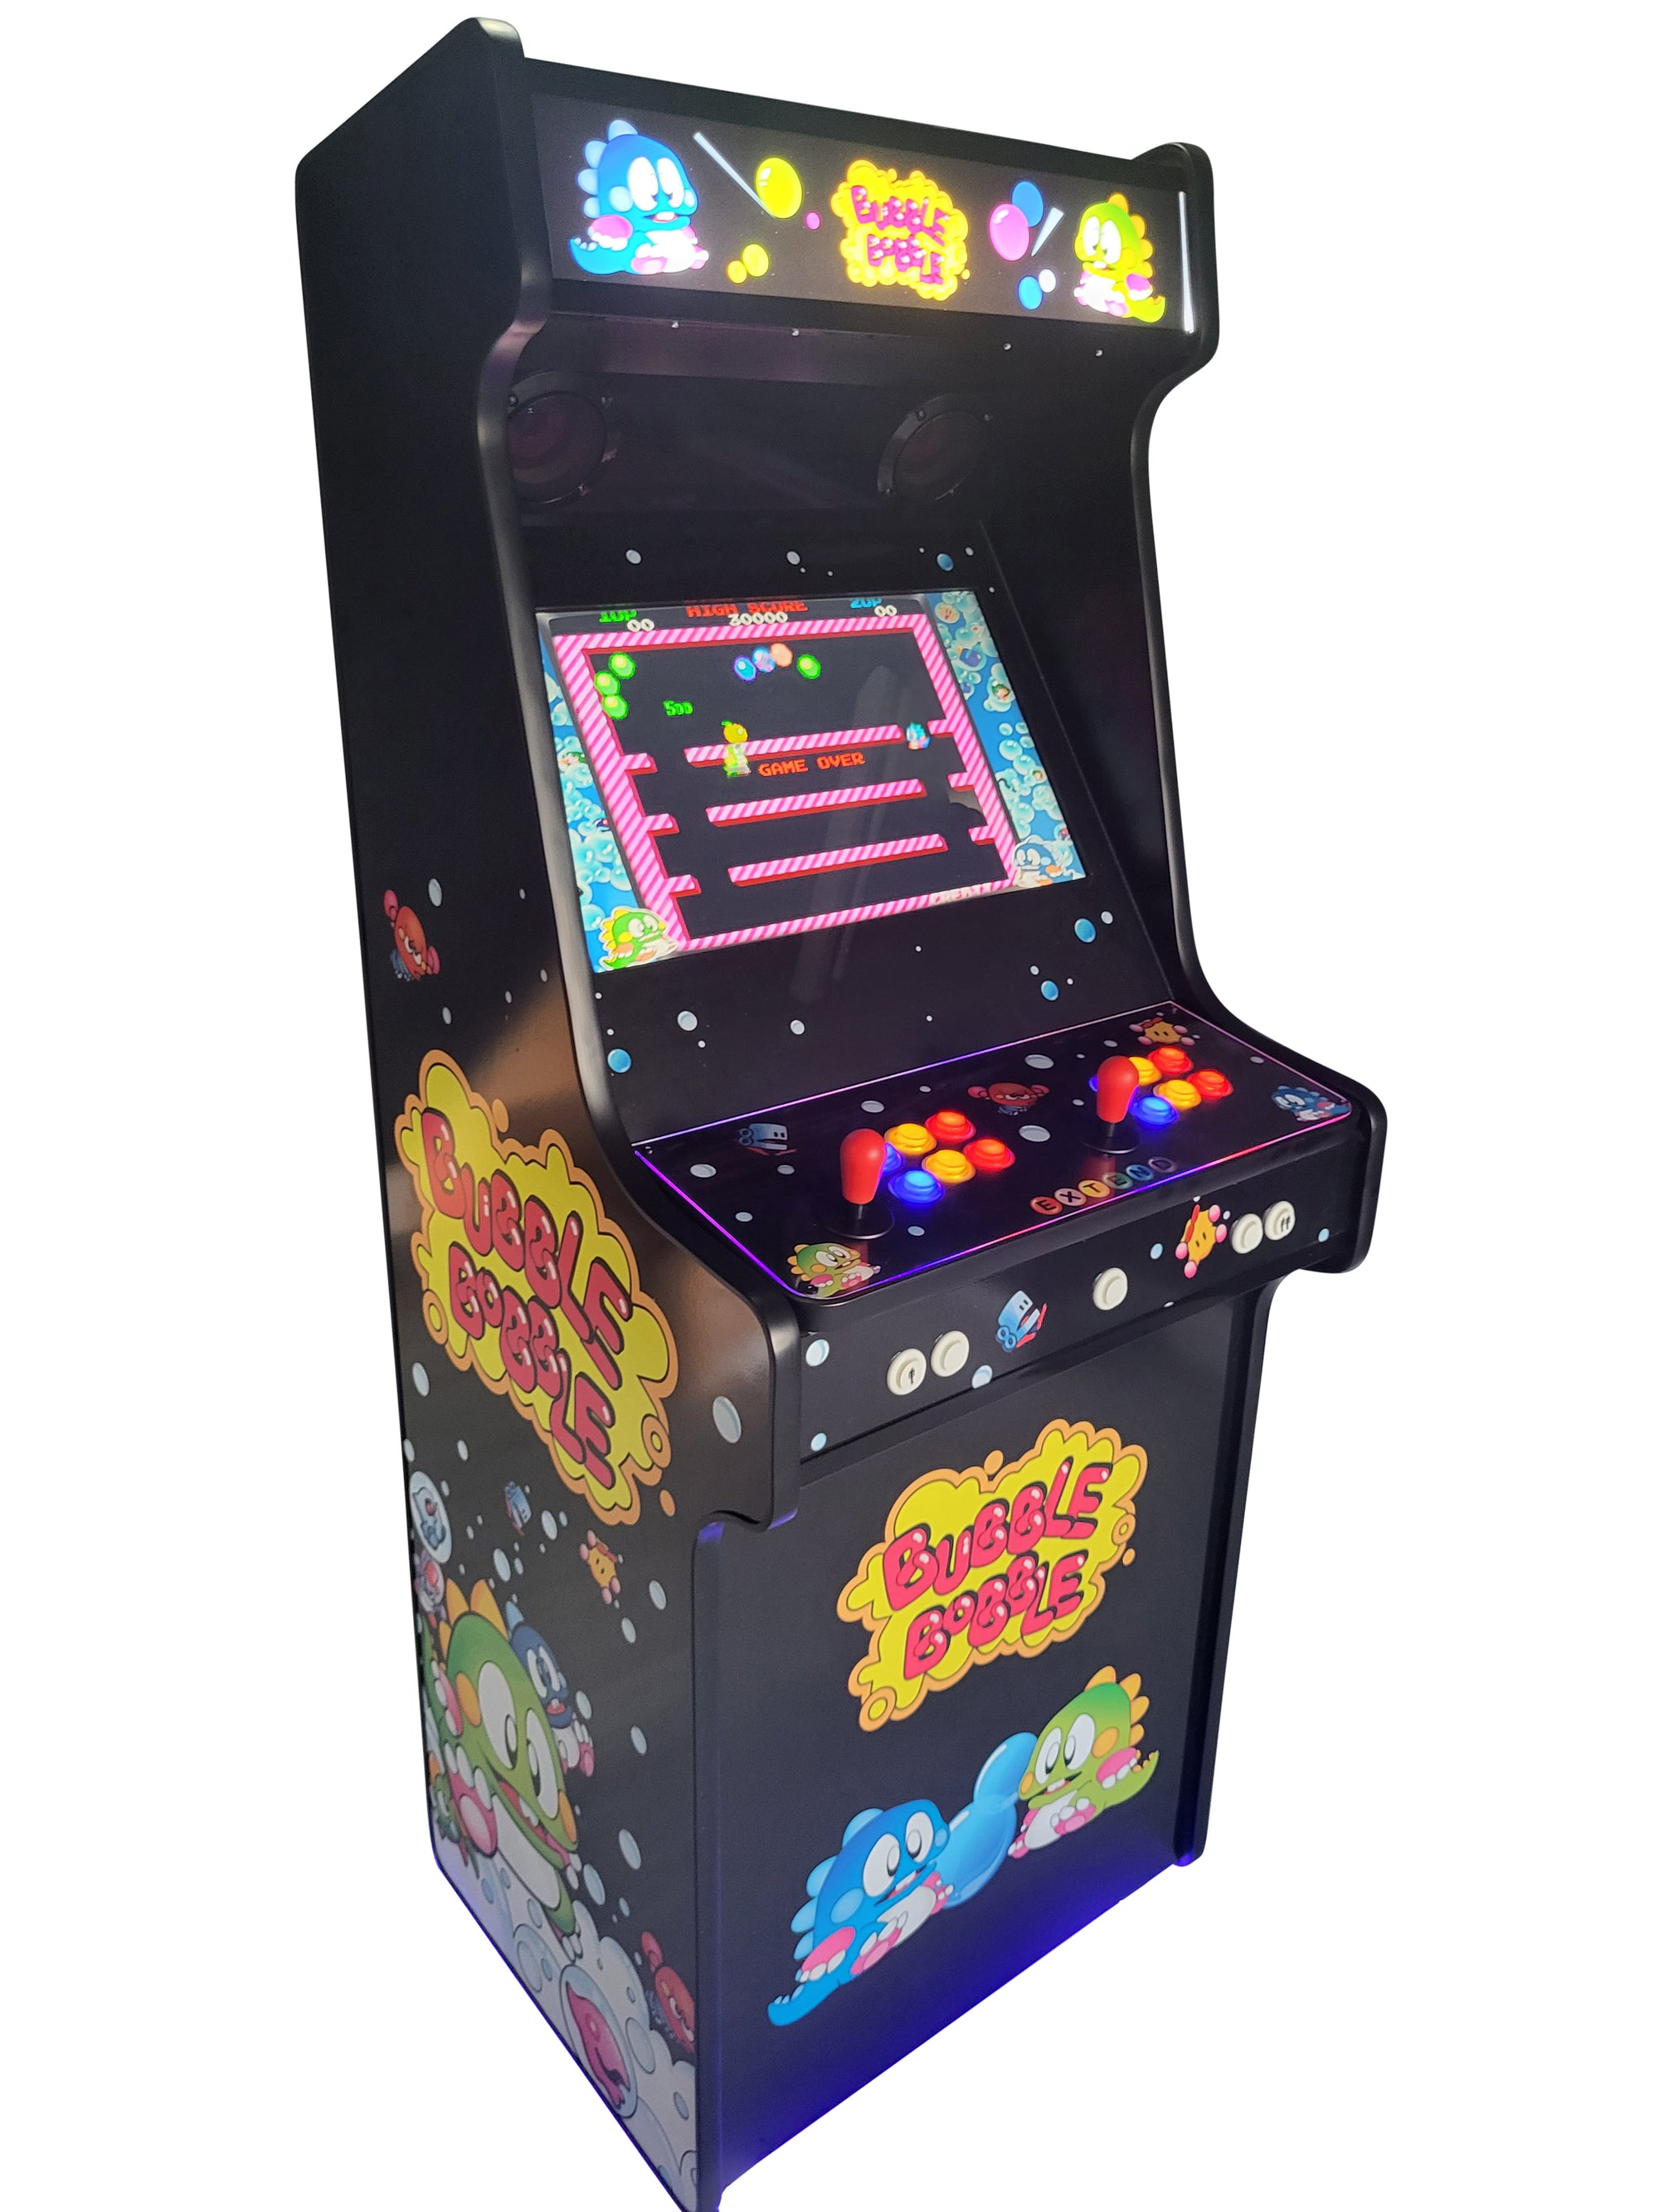 Bubble Bobble style arcade machine with 15,000 games.